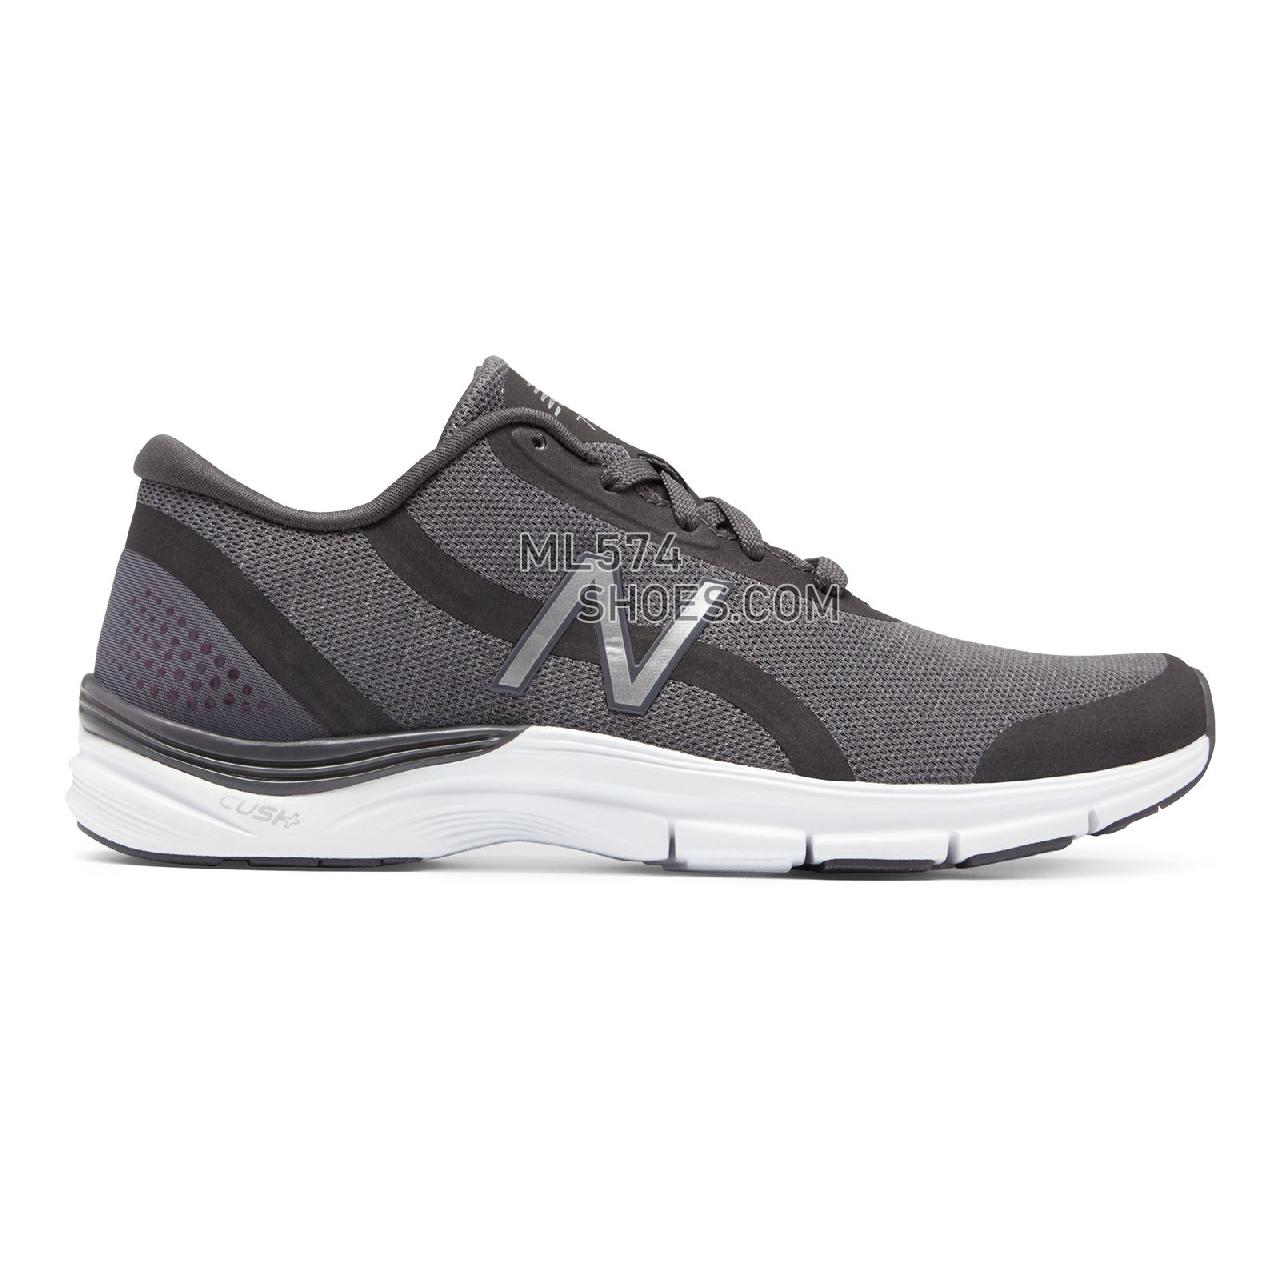 New Balance 711v3 Heathered Trainer - Women's 711 - X-training Charcoal with Silver - WX711CM3